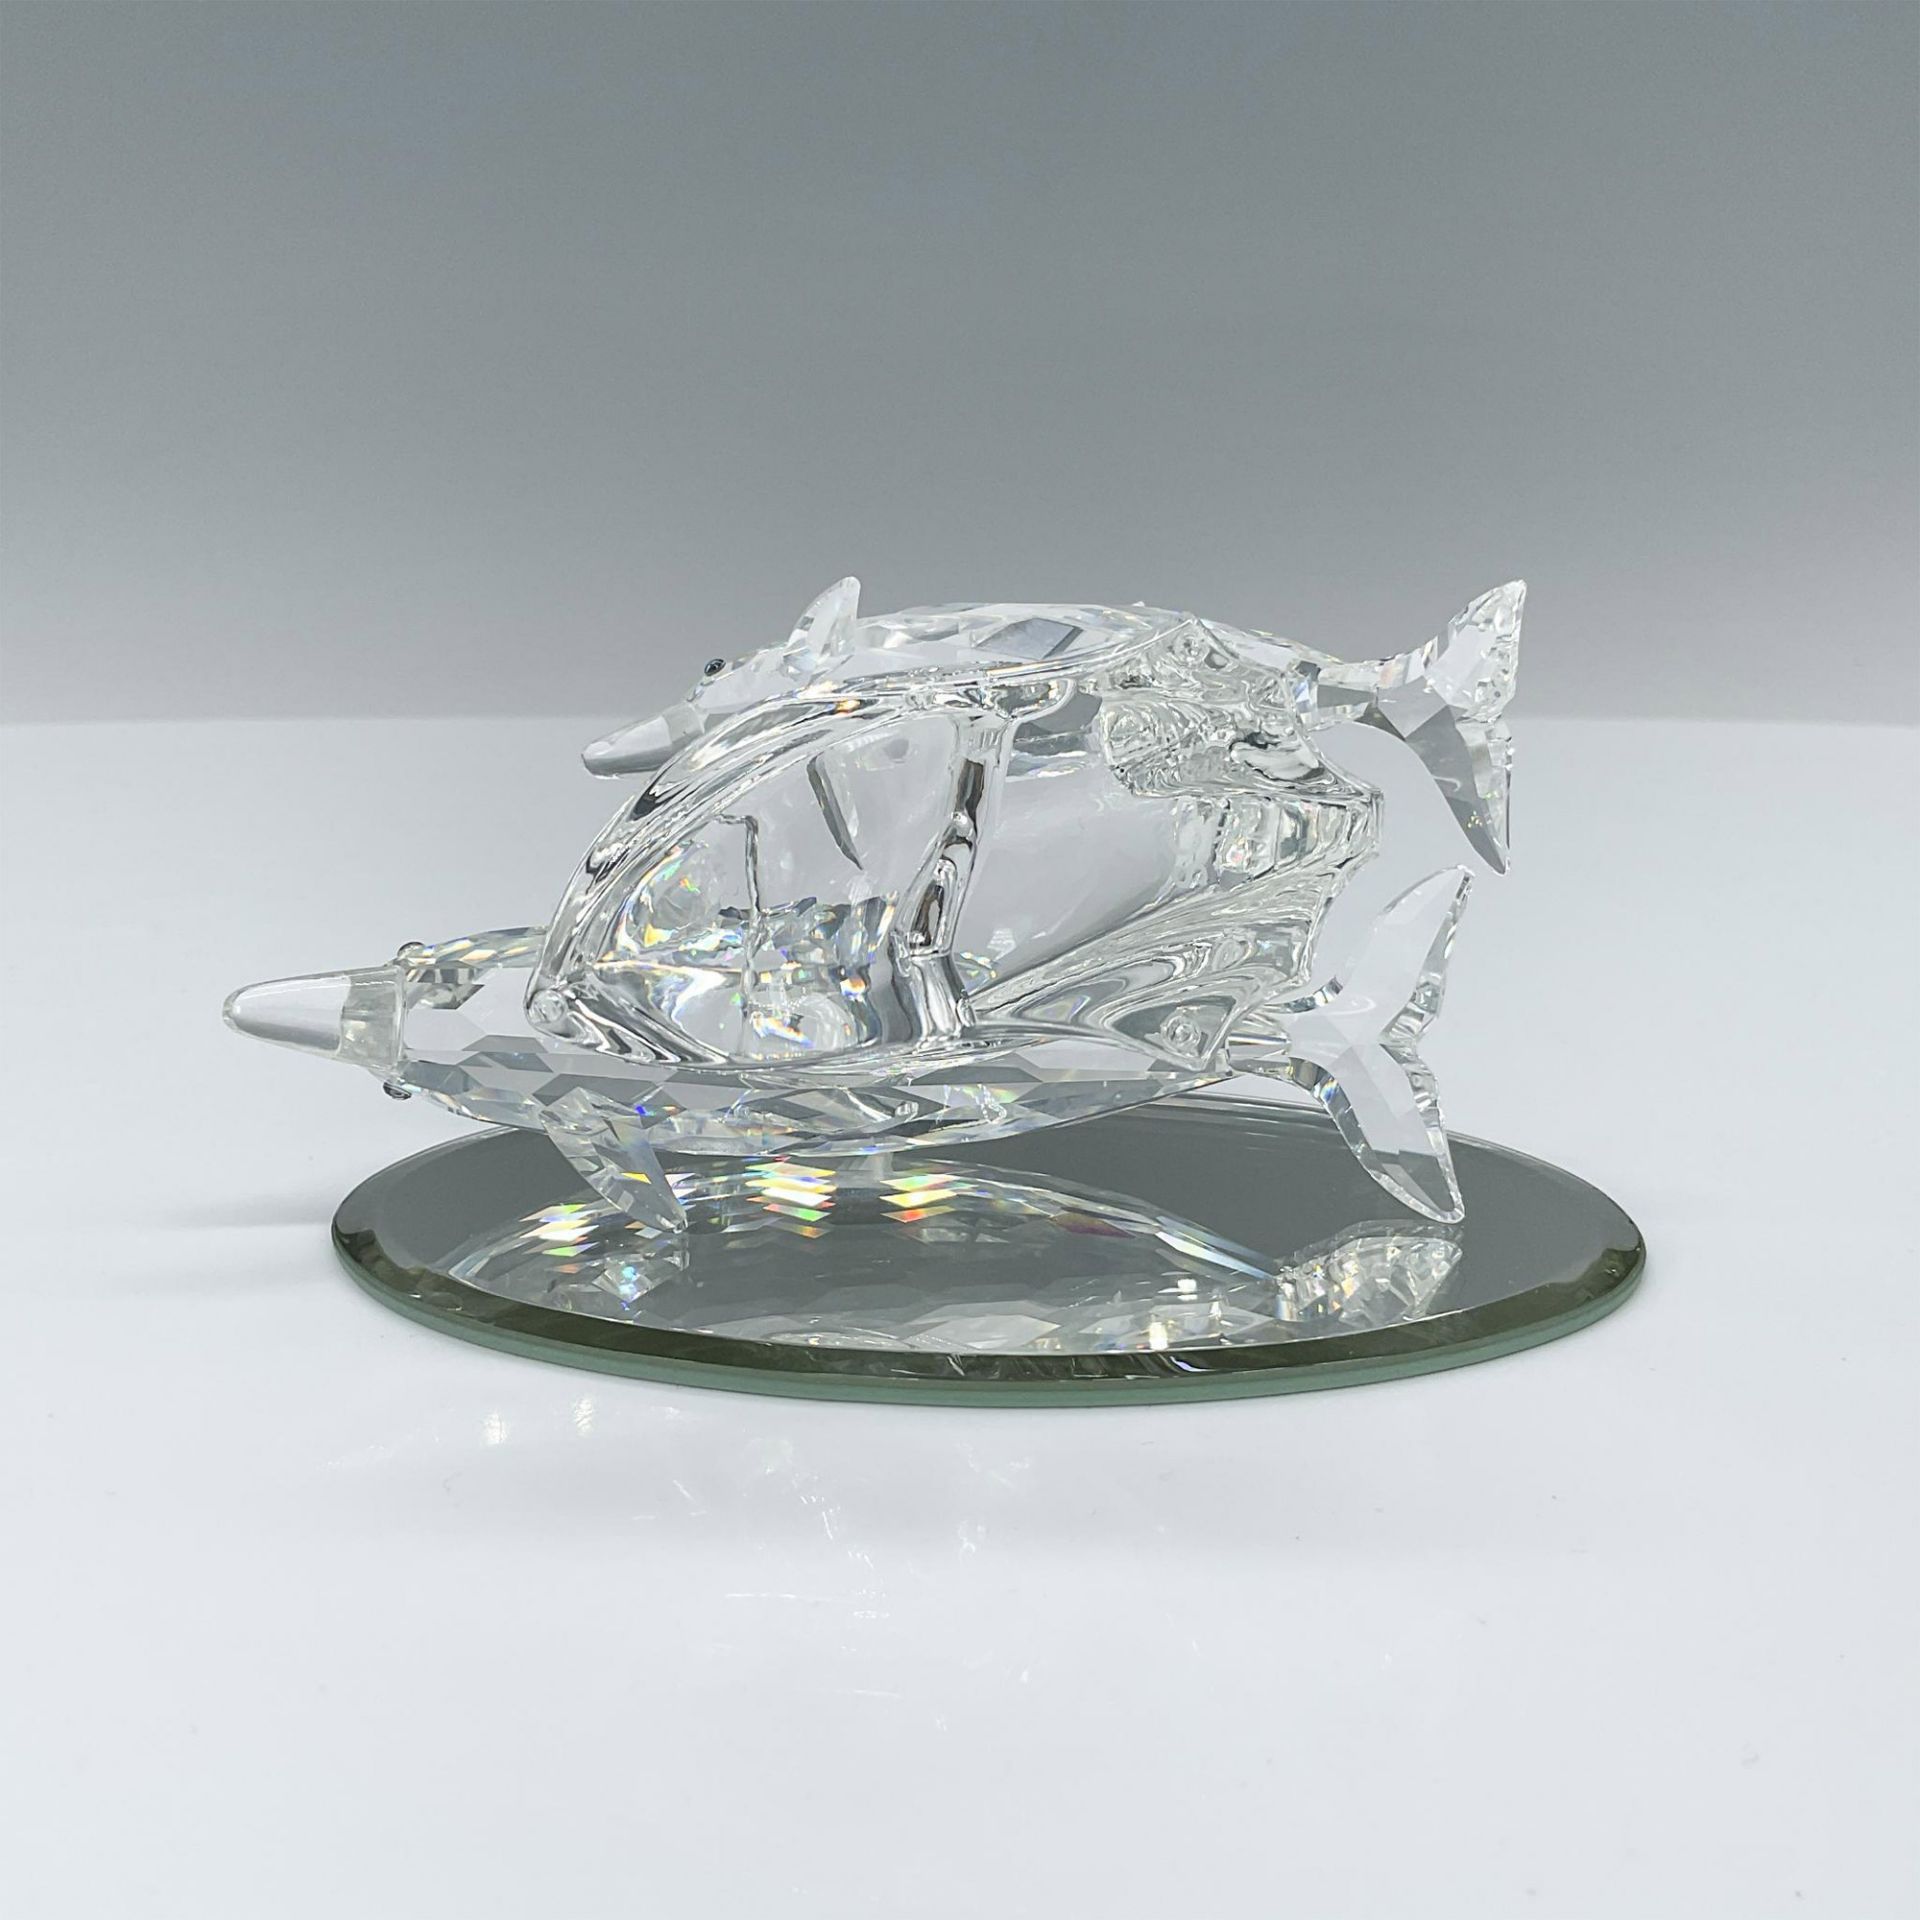 2pc Swarovski Silver Crystal Figurines, Lead Me Dolphins - Image 3 of 4